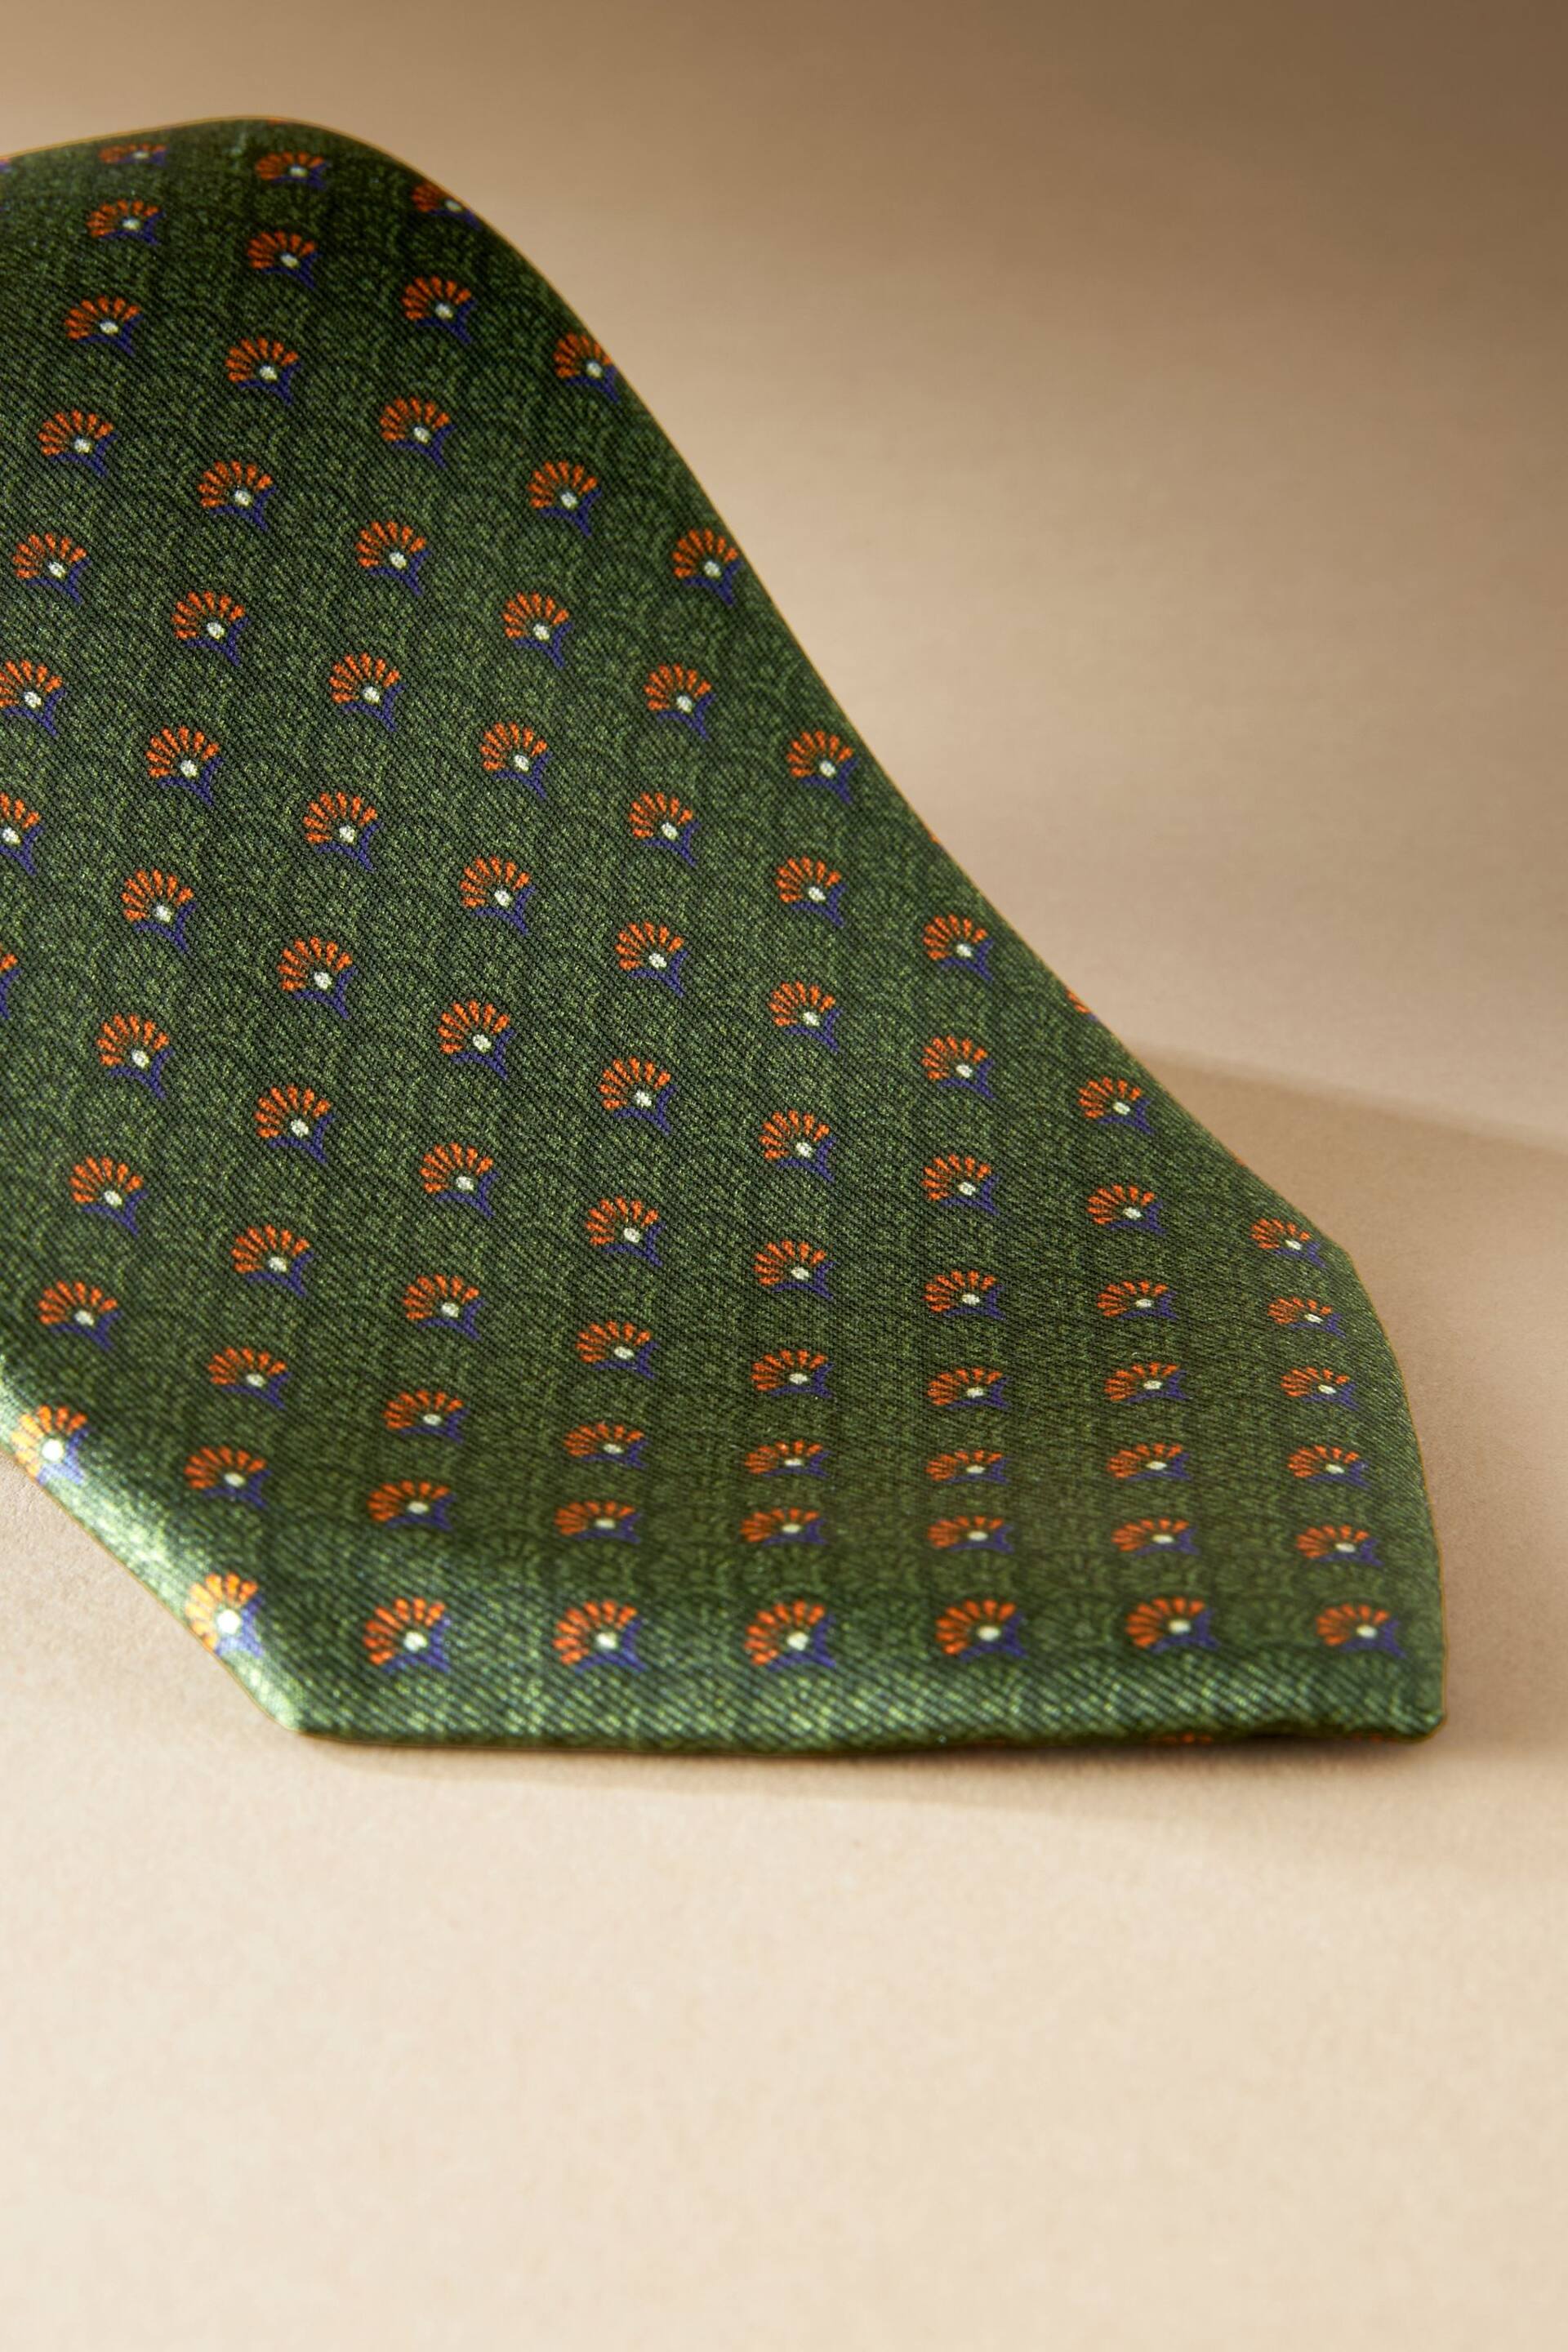 Olive Green Geometric Signature Made In Italy Design Tie - Image 2 of 3